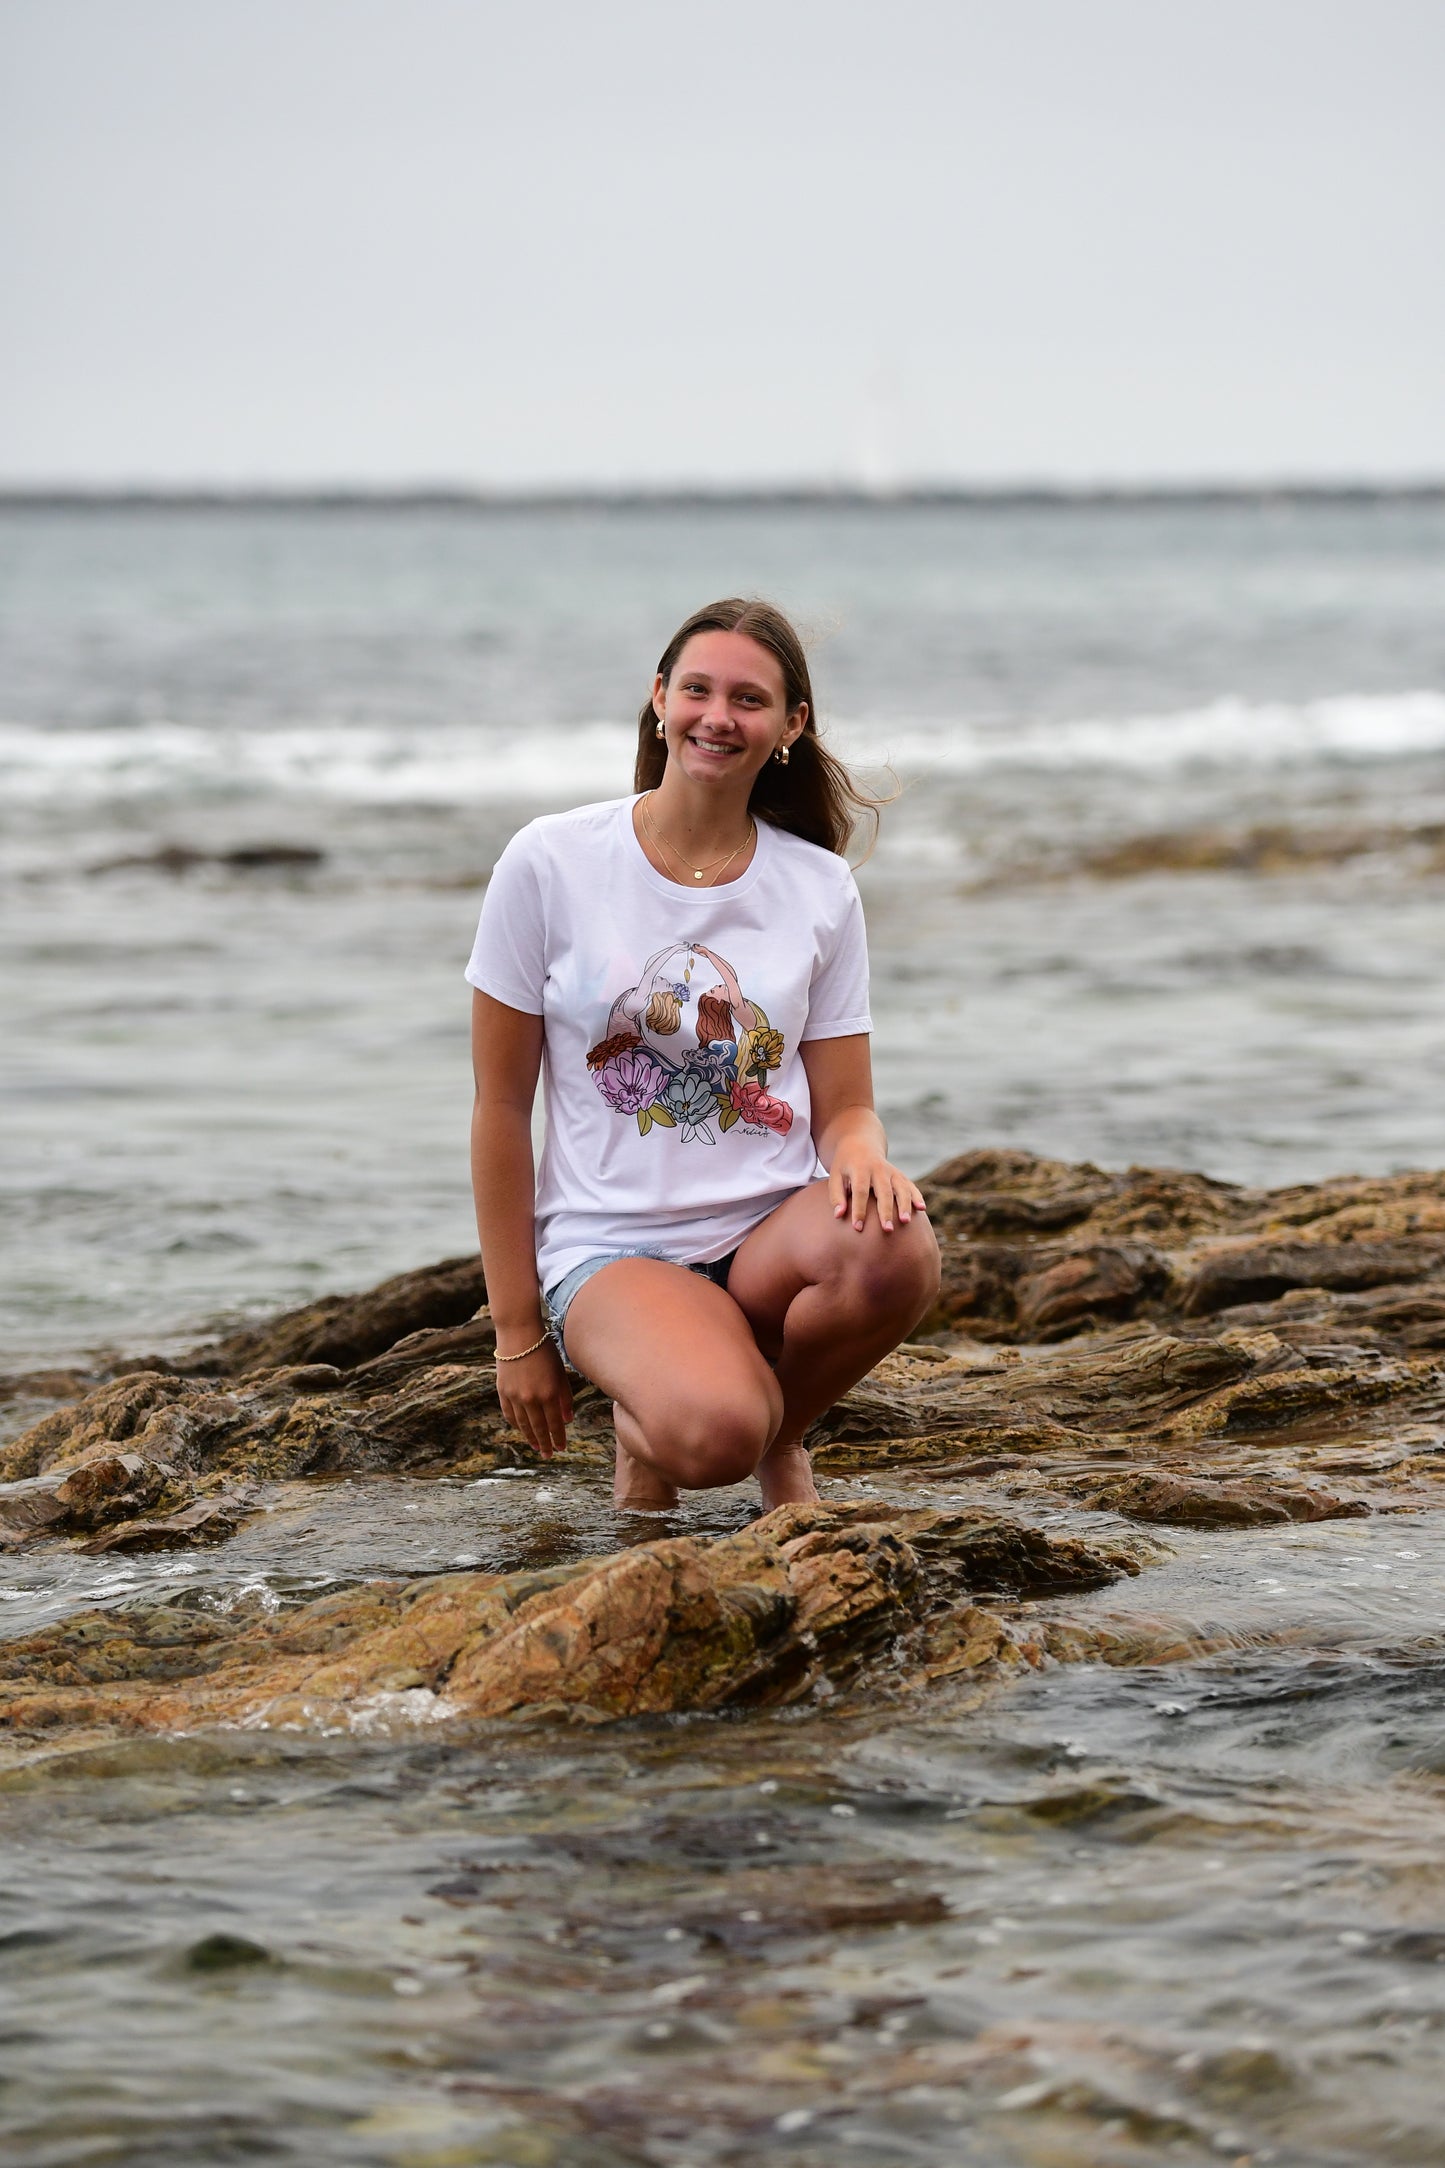 Load image into Gallery viewer, SEASTERS mermaids floral had-drawn graphic design artist&amp;#39;s t-shirt for women who like surfing, the beach and mermaids. Art by Nadia Watts
